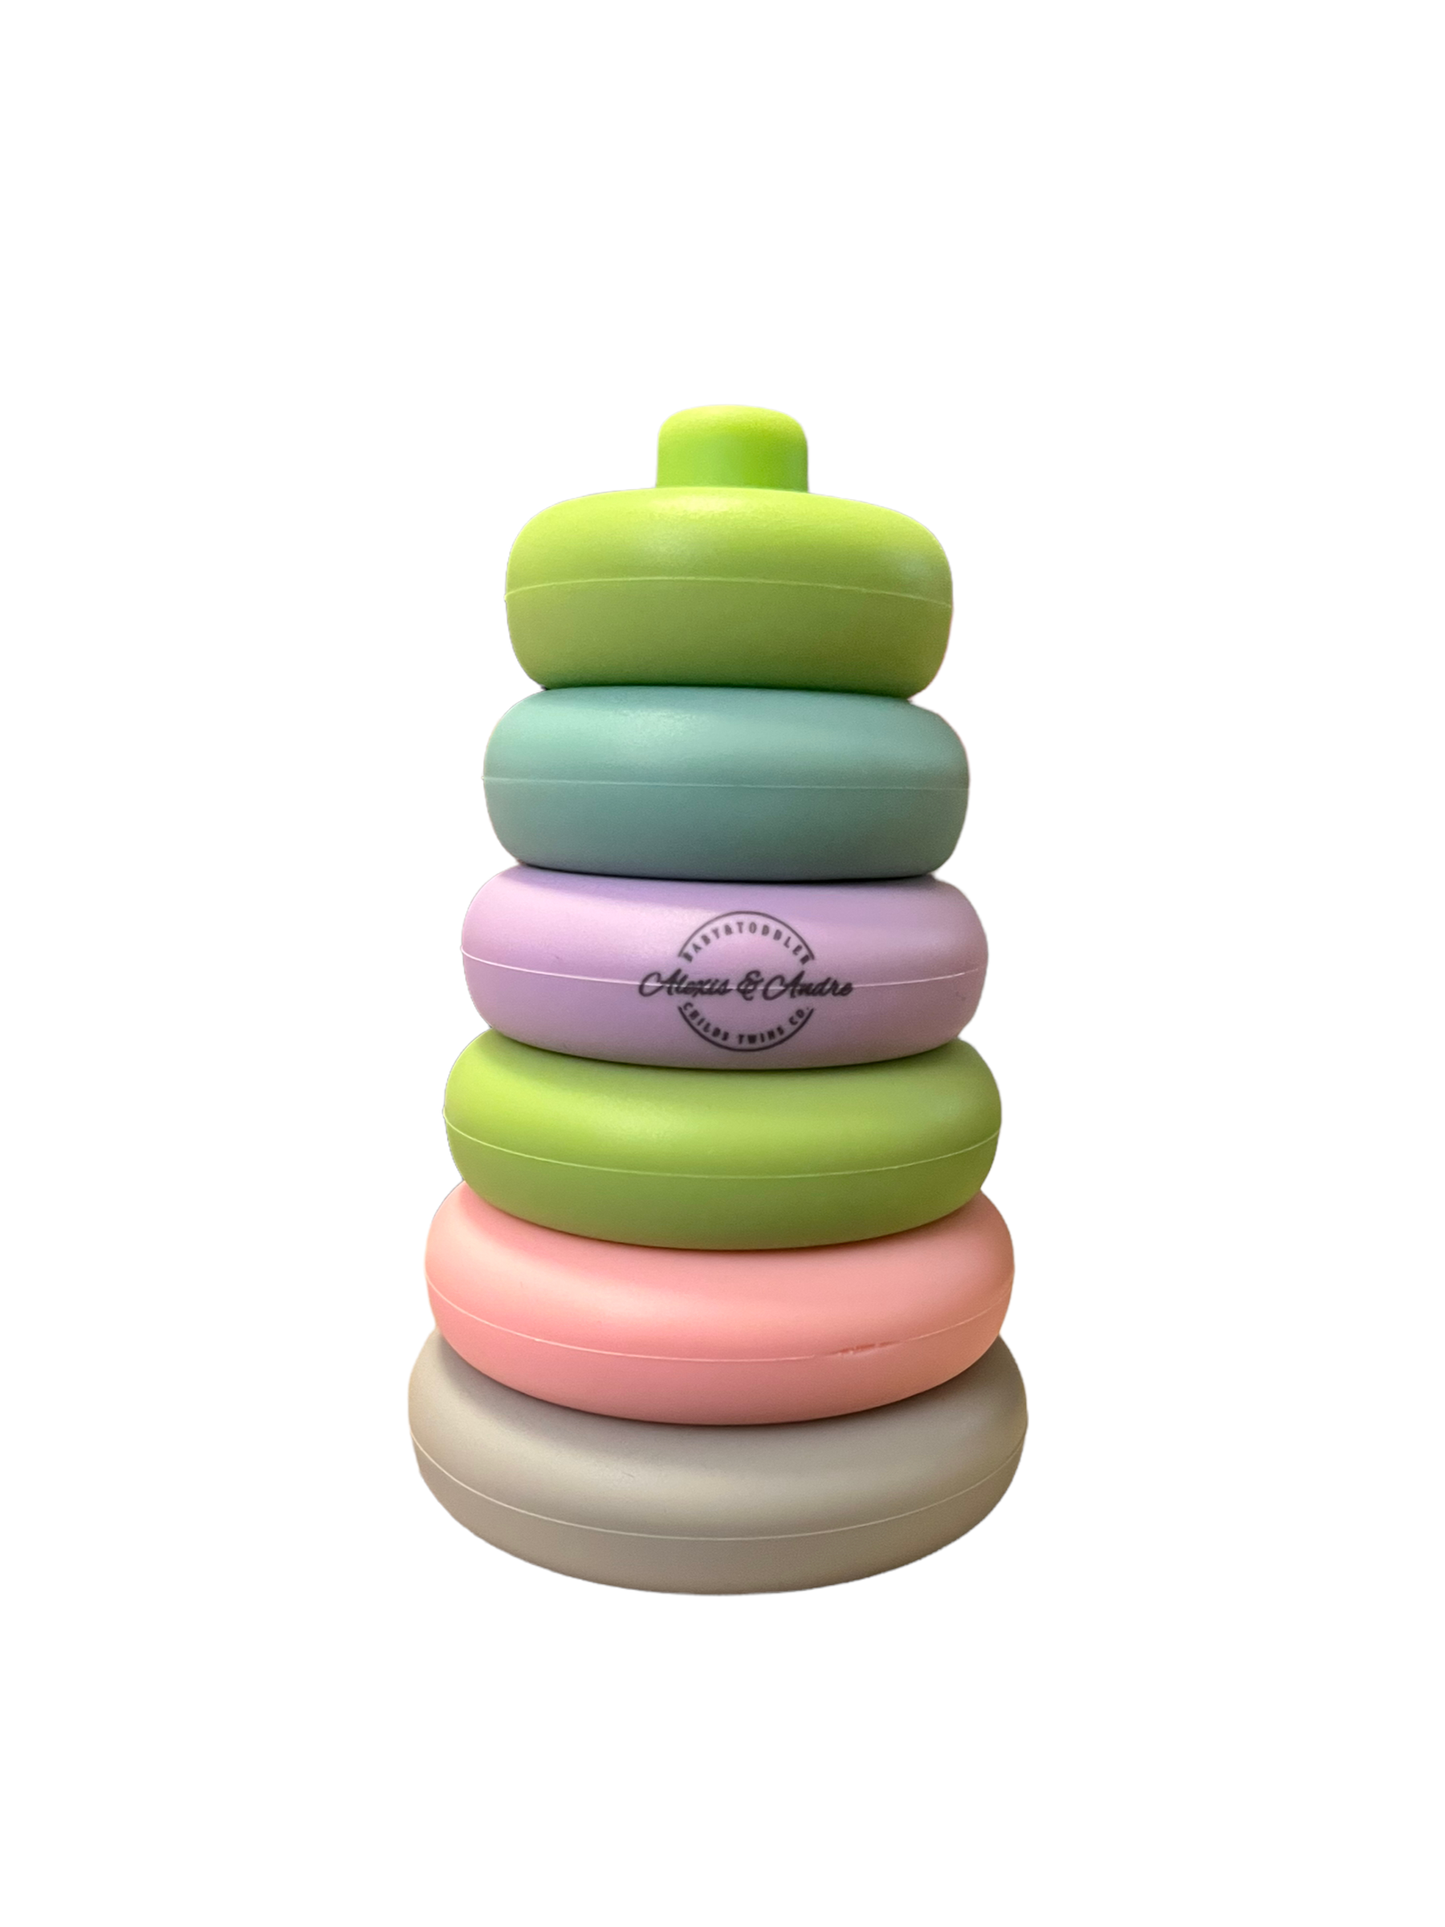 Alexis&Andre - Circle Stack toy